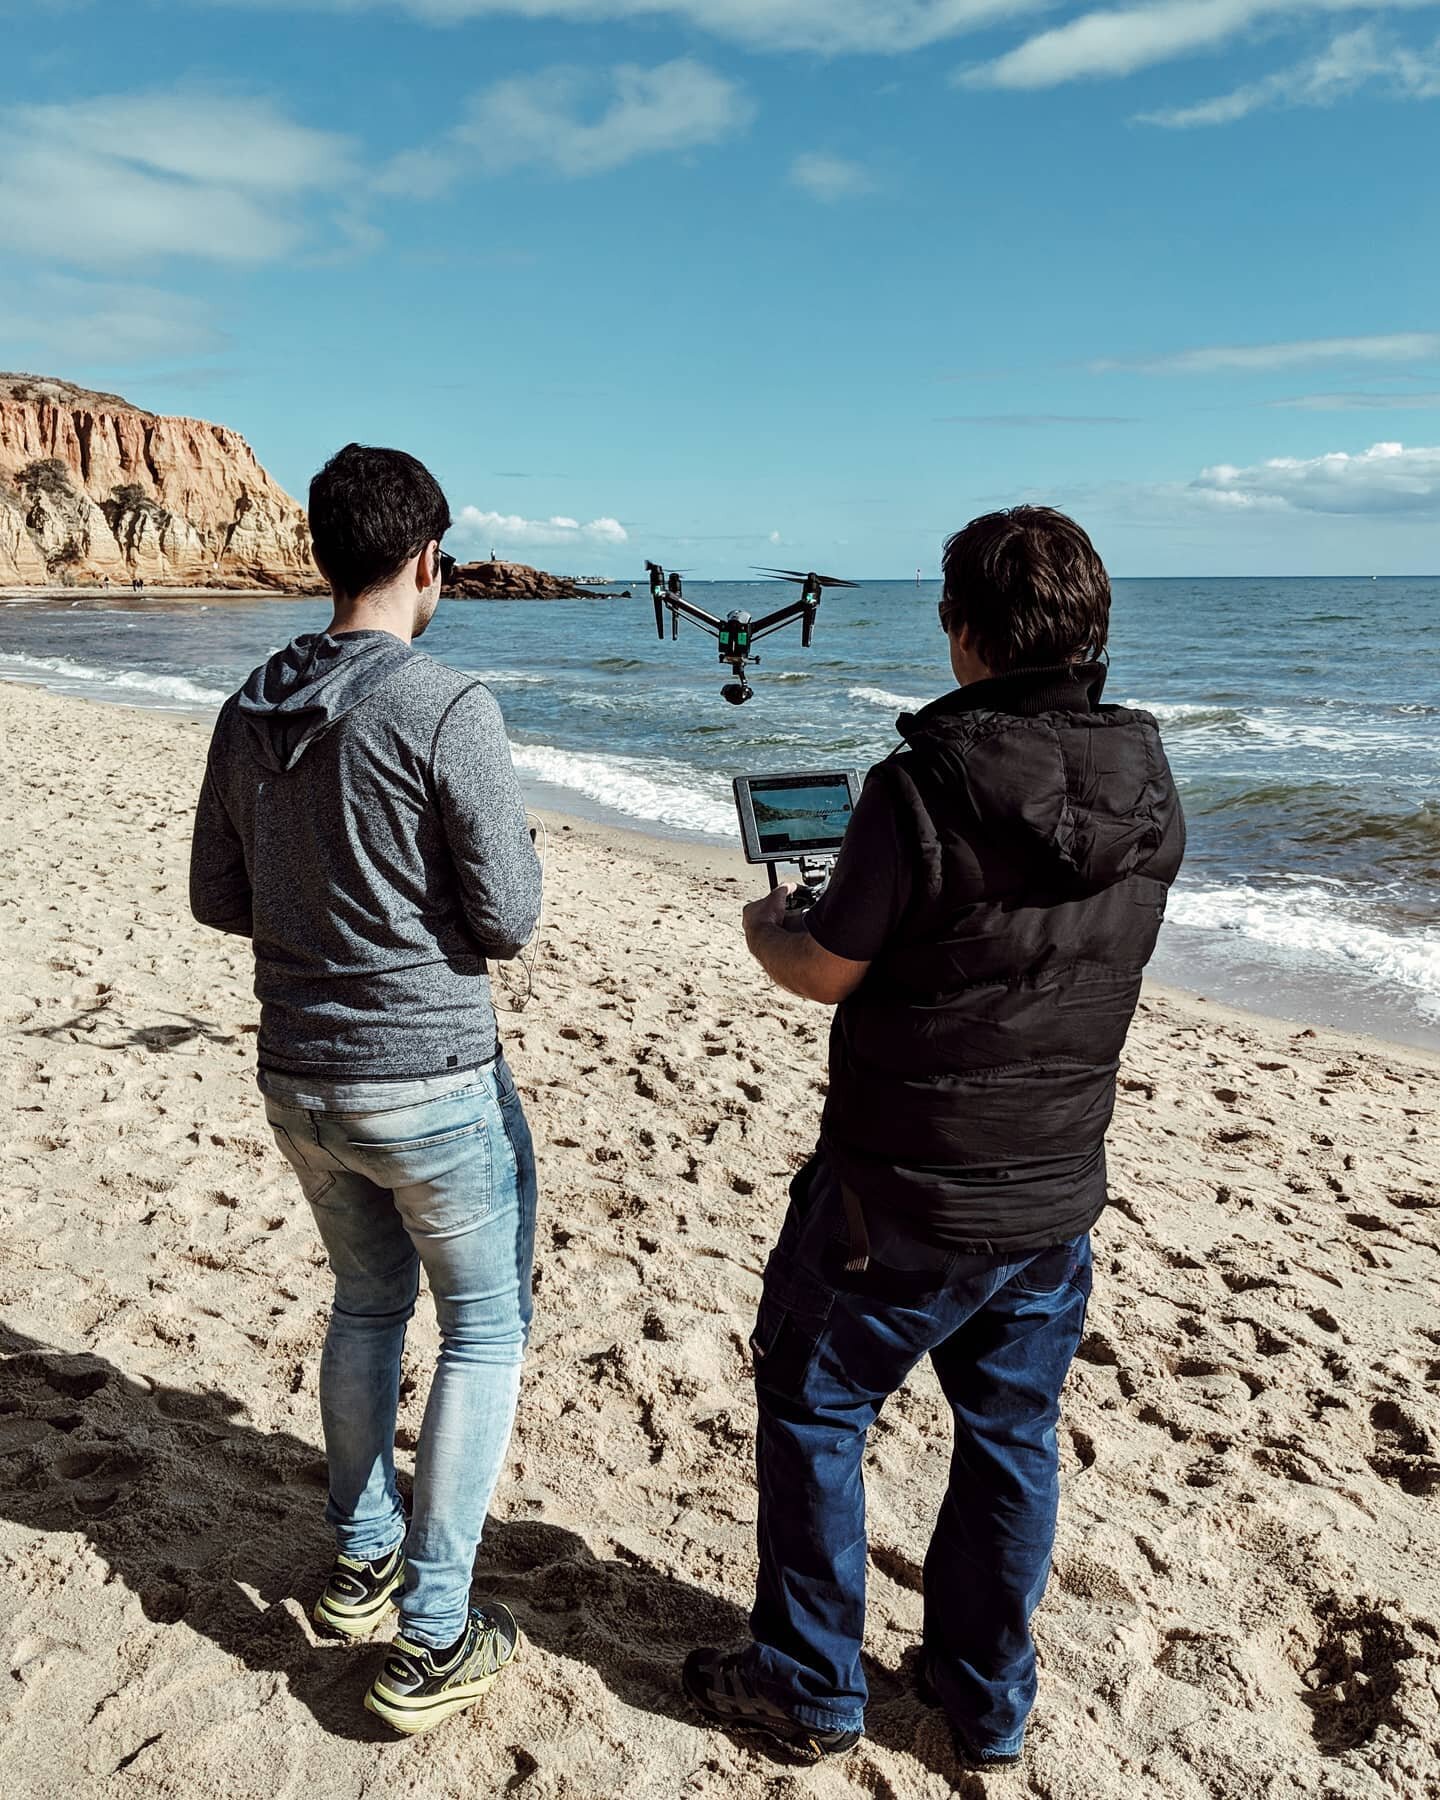 Two-person drone operation. One to fly and one to control the camera. Both in unison to create some beautiful and sophisticated shots 🎥 @rotorscopemedia